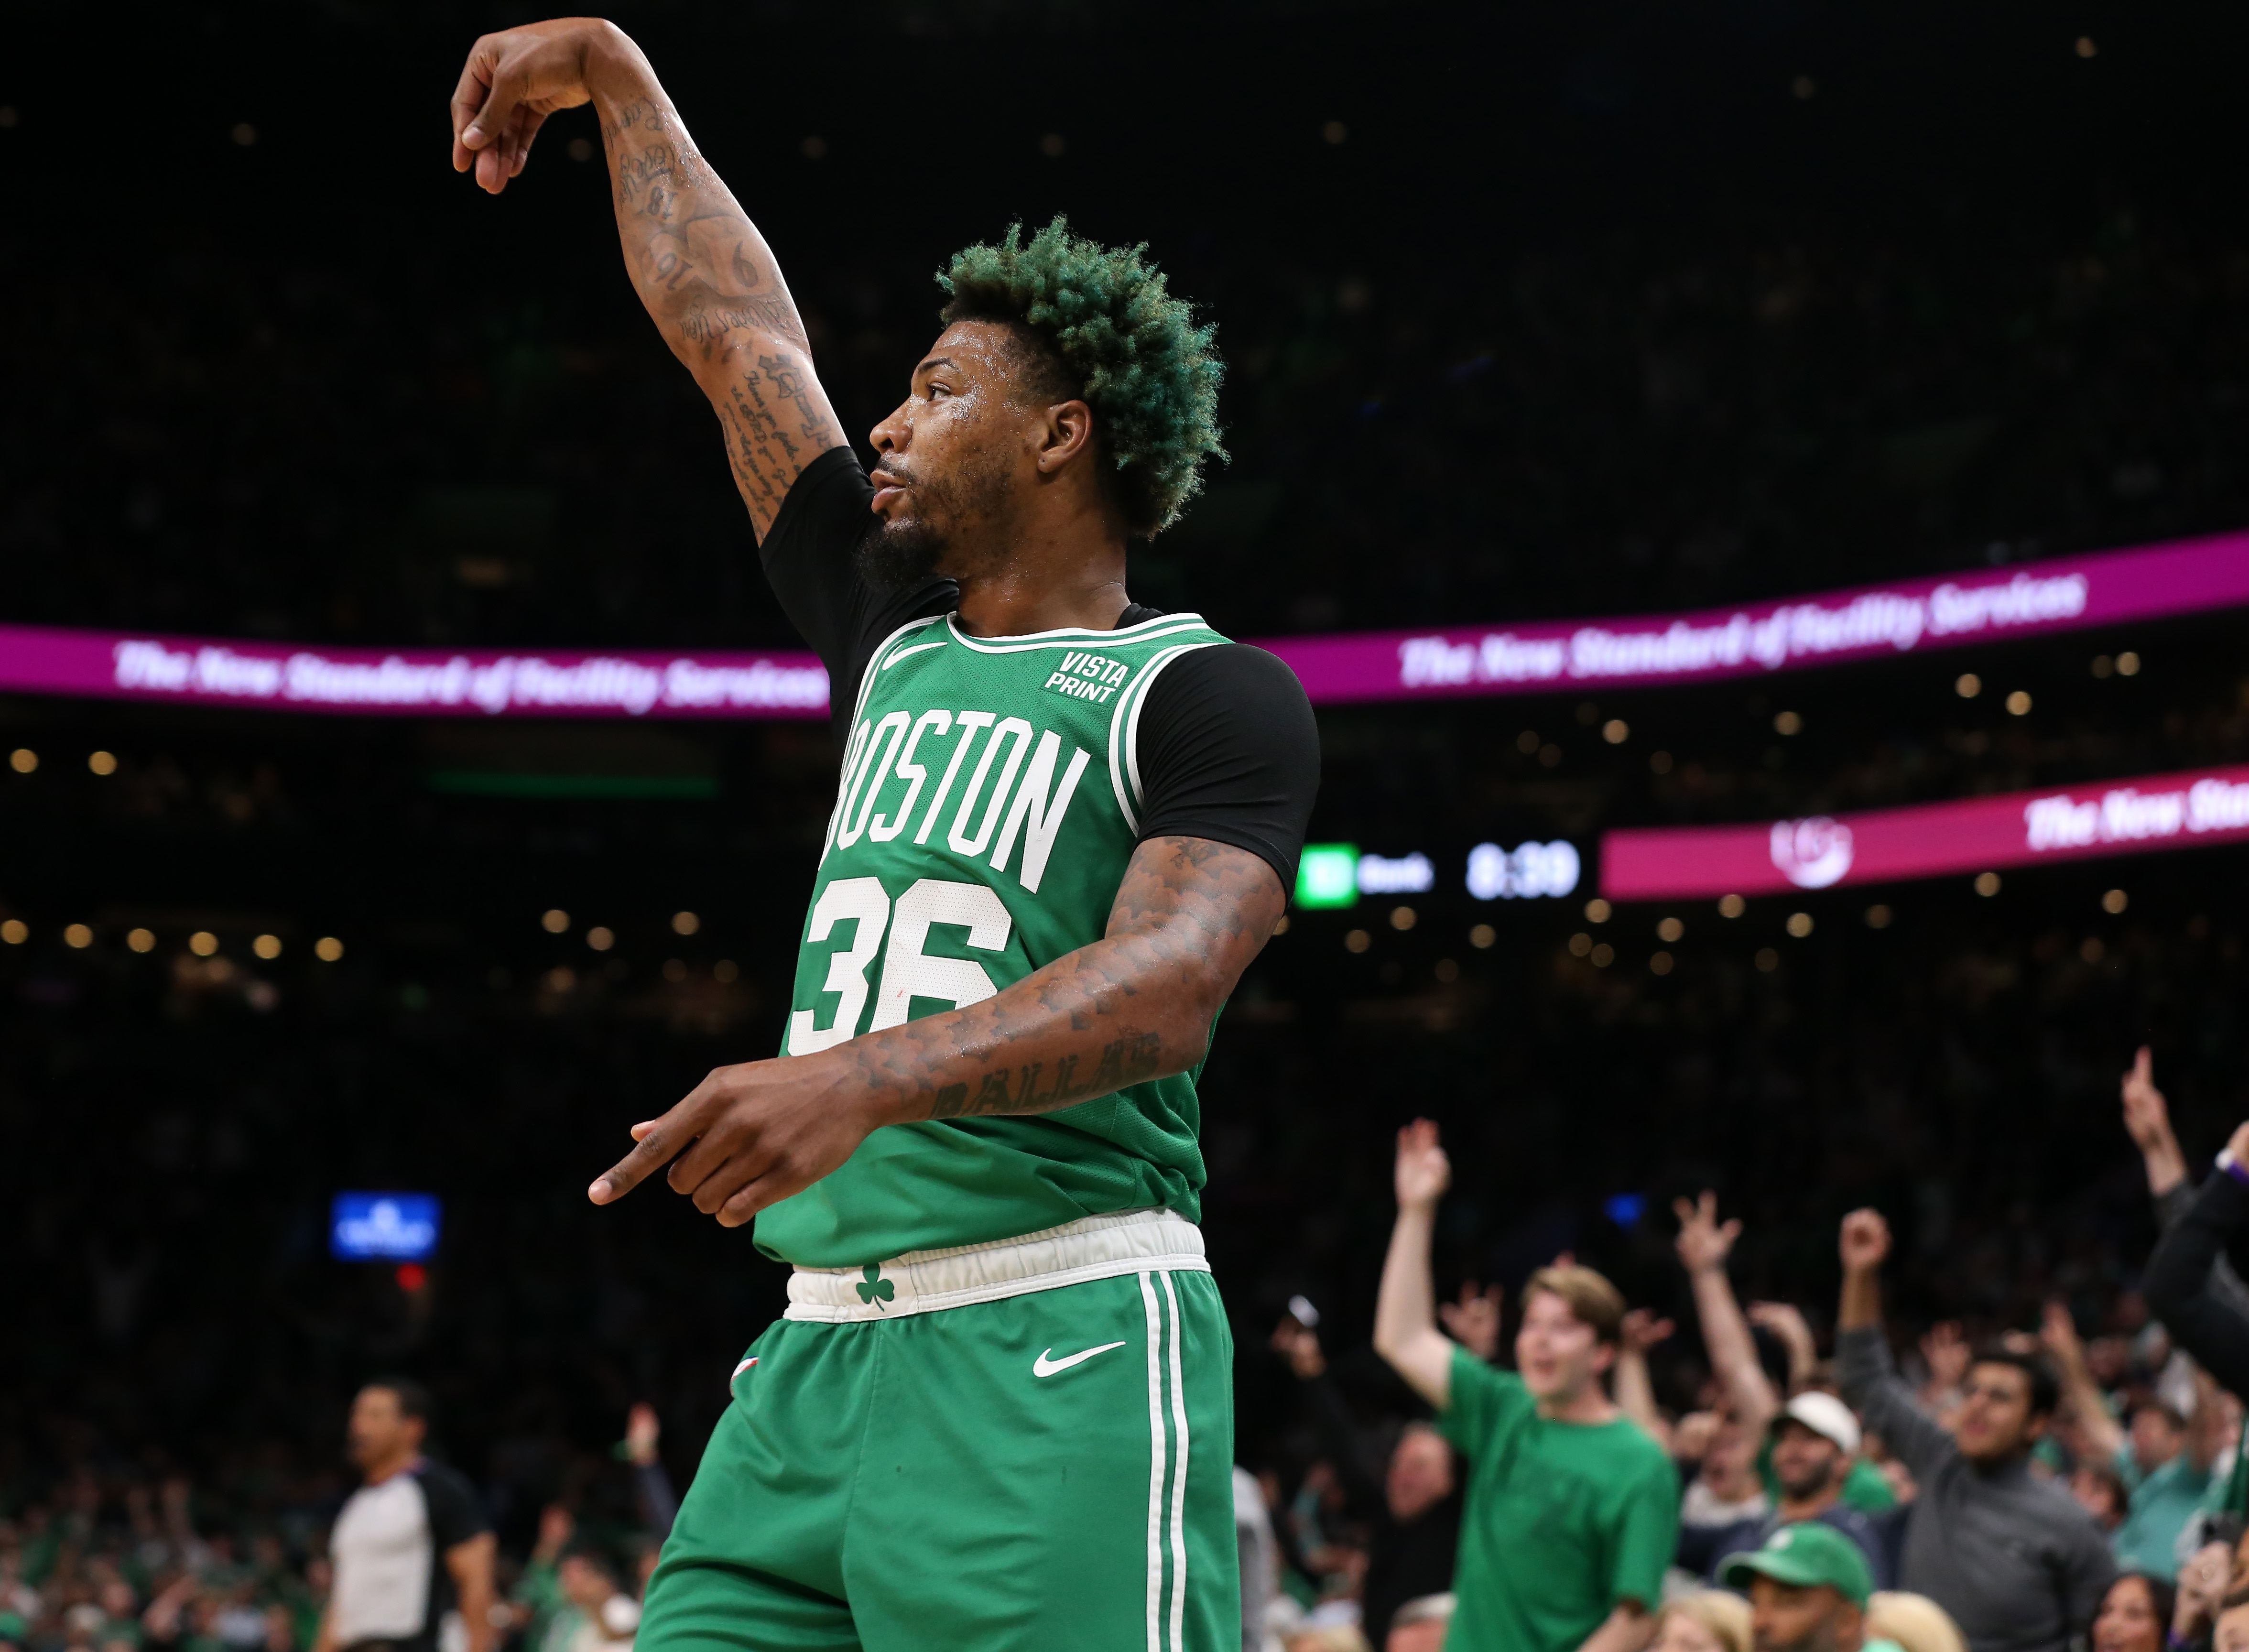 Marcus Smart opens up about Ja Morant, joining Memphis Grizzlies